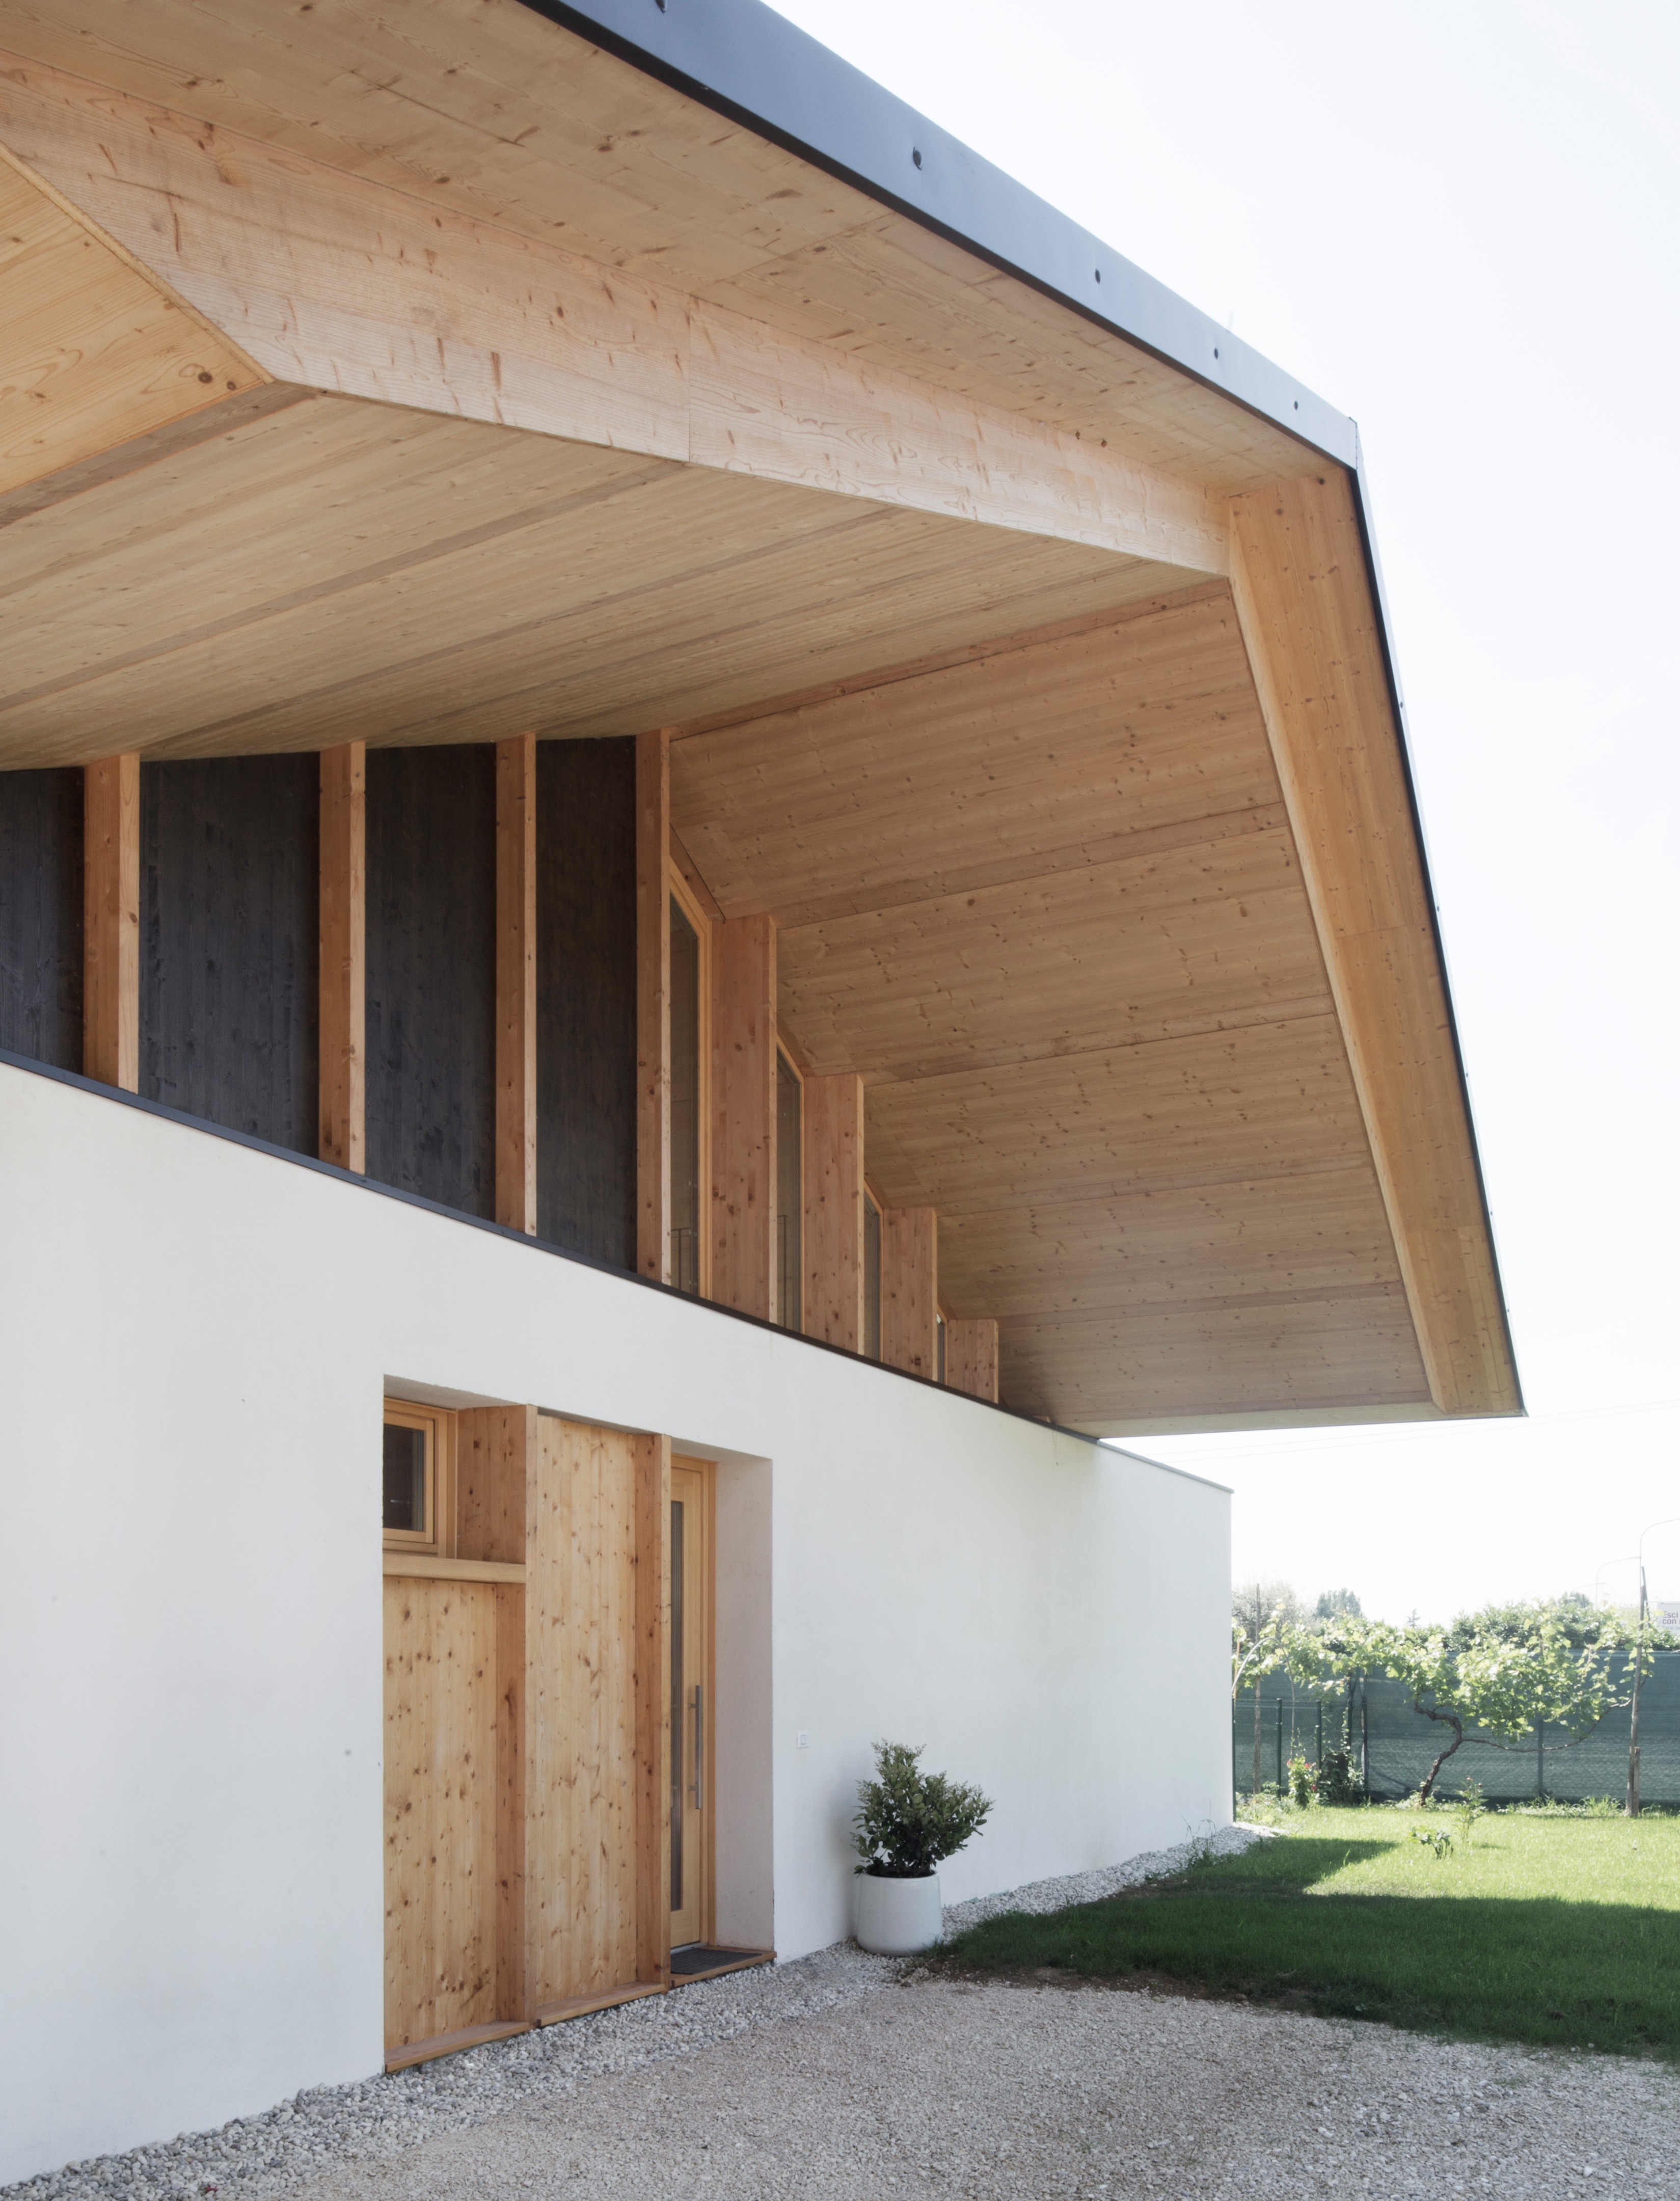 SCL Straw-Bale House in Vicenza, Italy by Jimmi Pianezzola